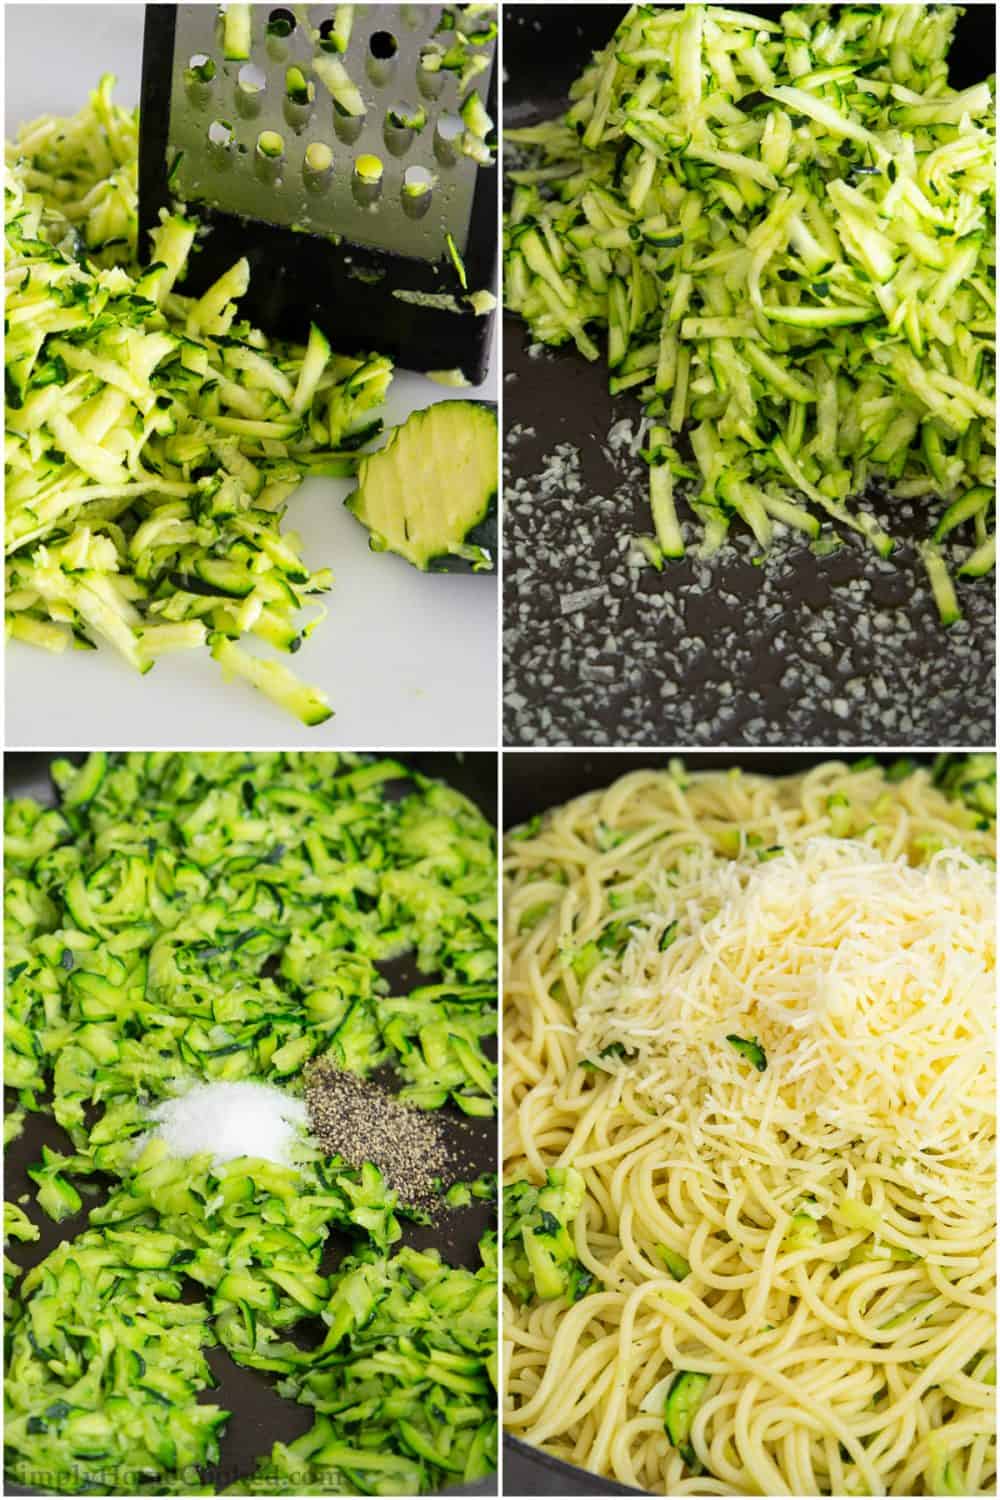 How to make pasta with zucchini step by step - start by shredding the zucchini